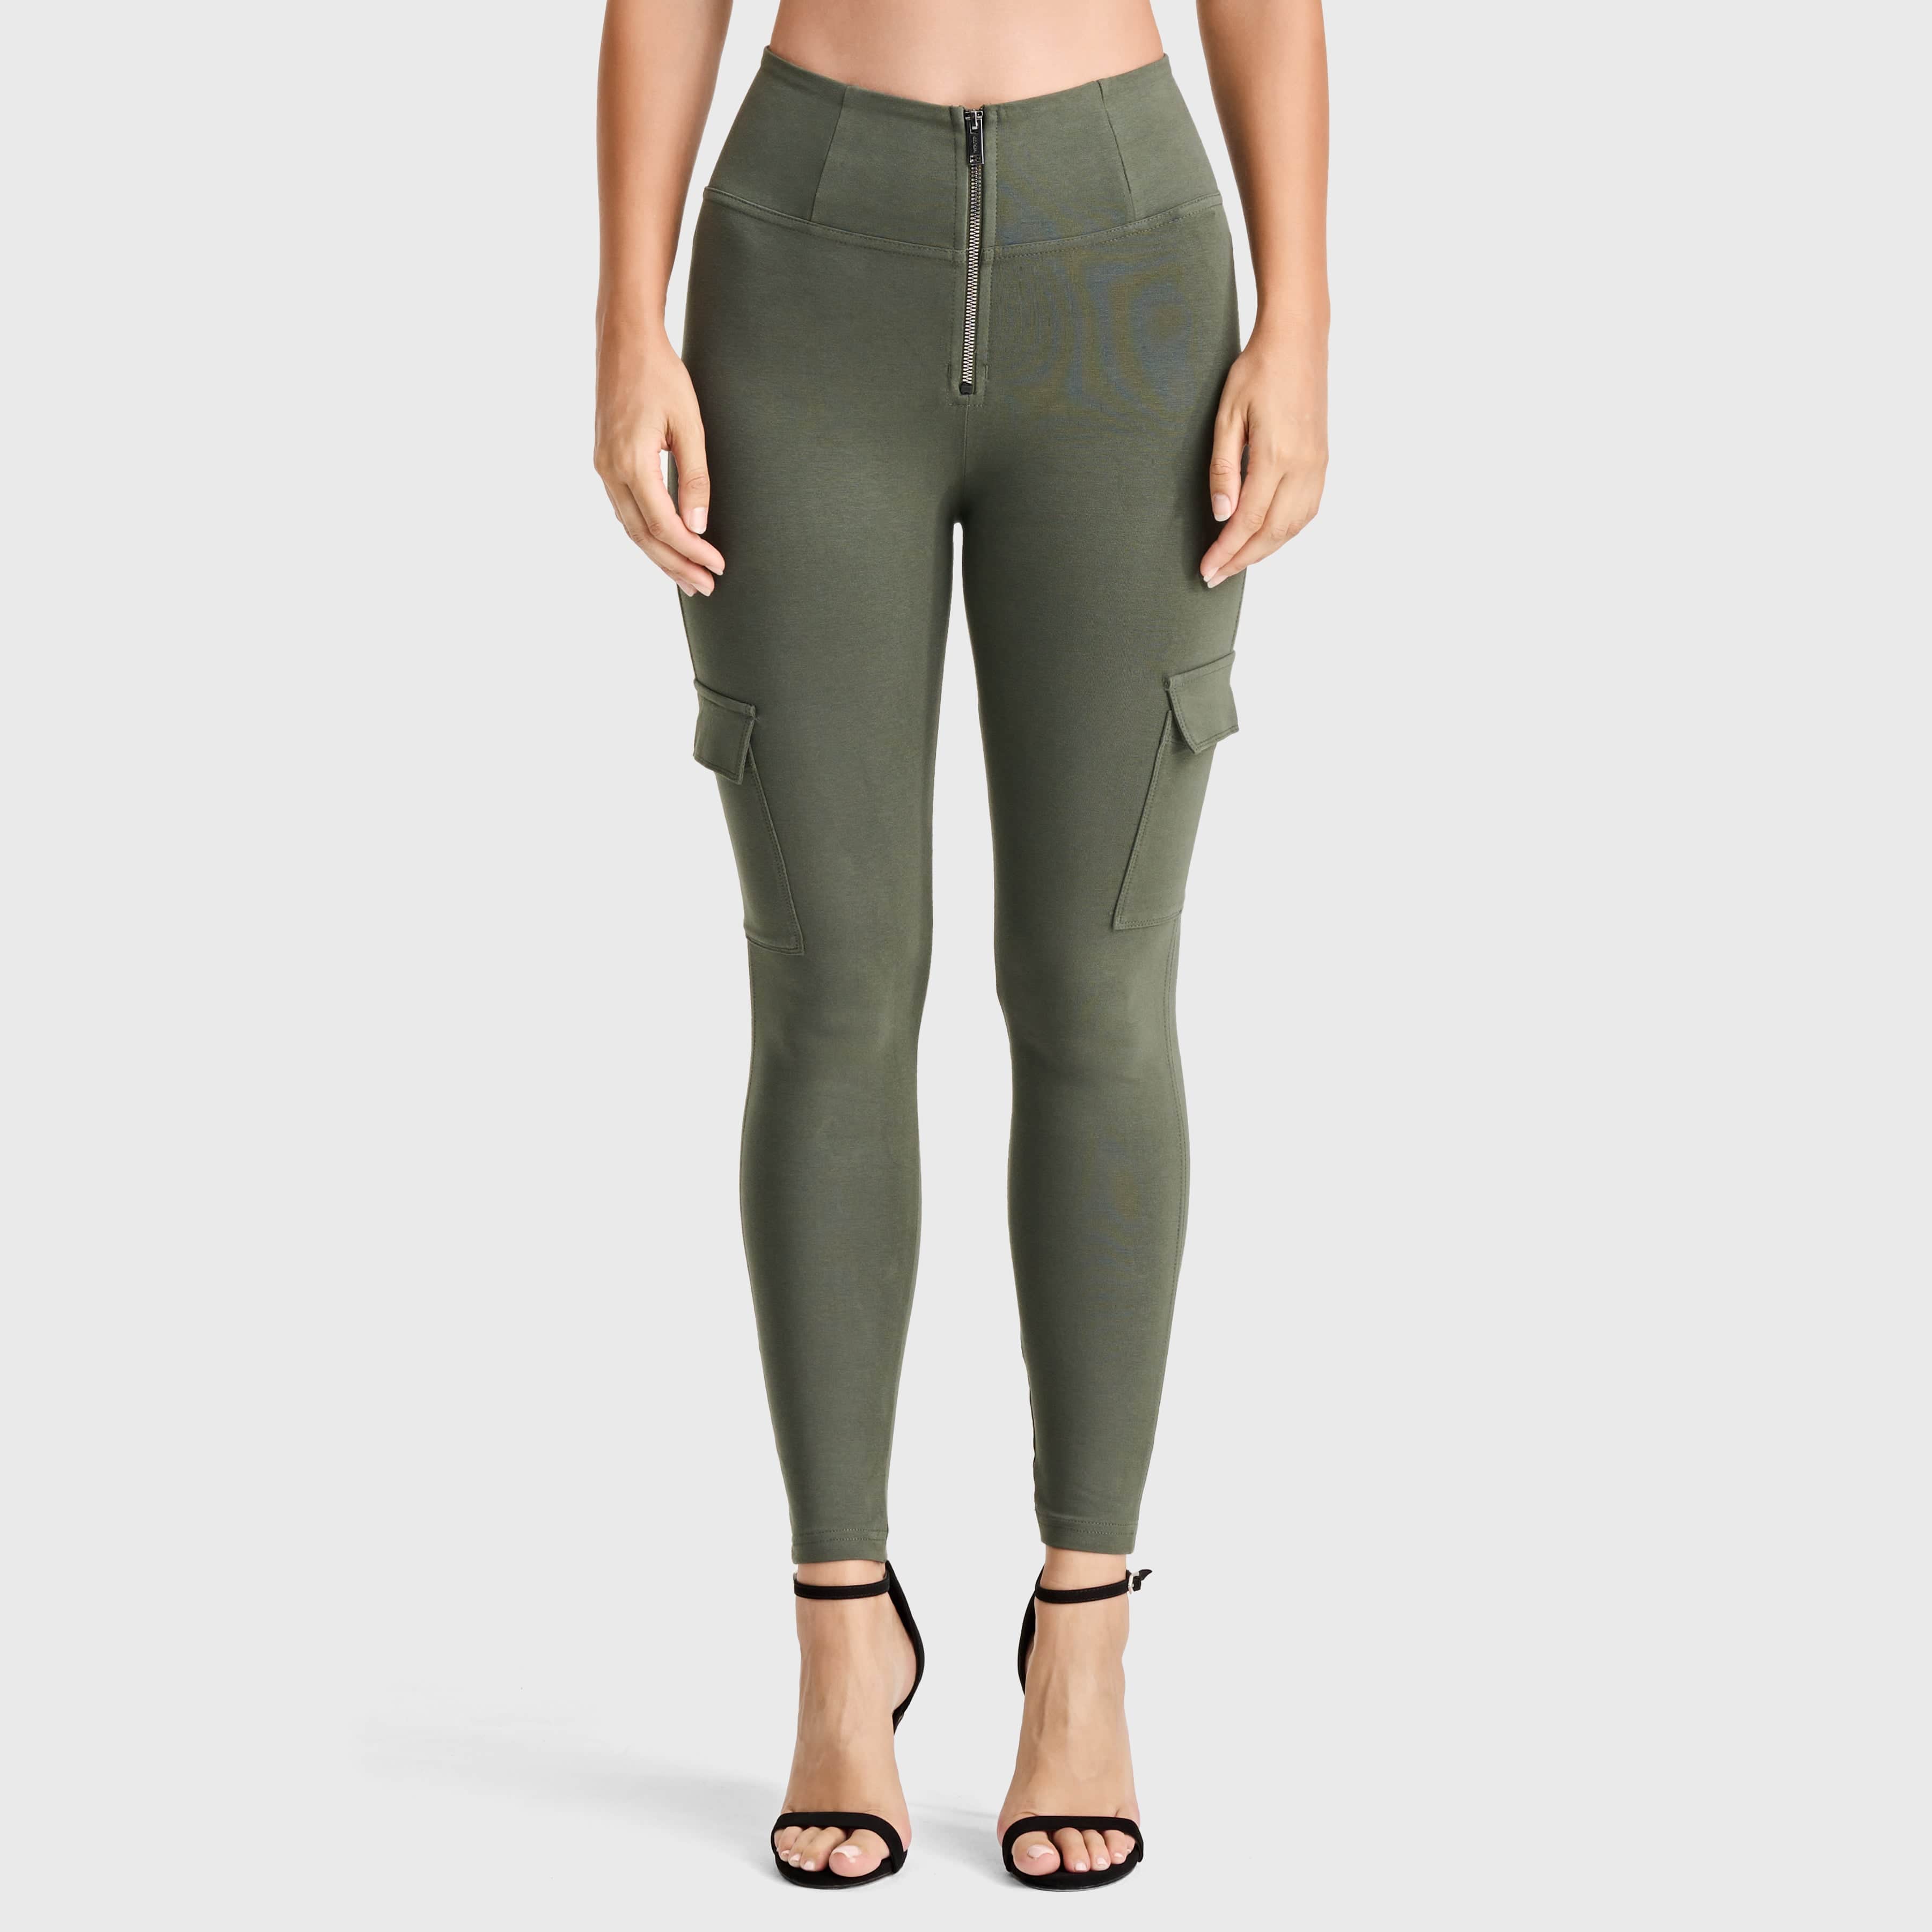 WR.UP® Cargo Fashion - High Waisted - Petite Length - Military Green 2